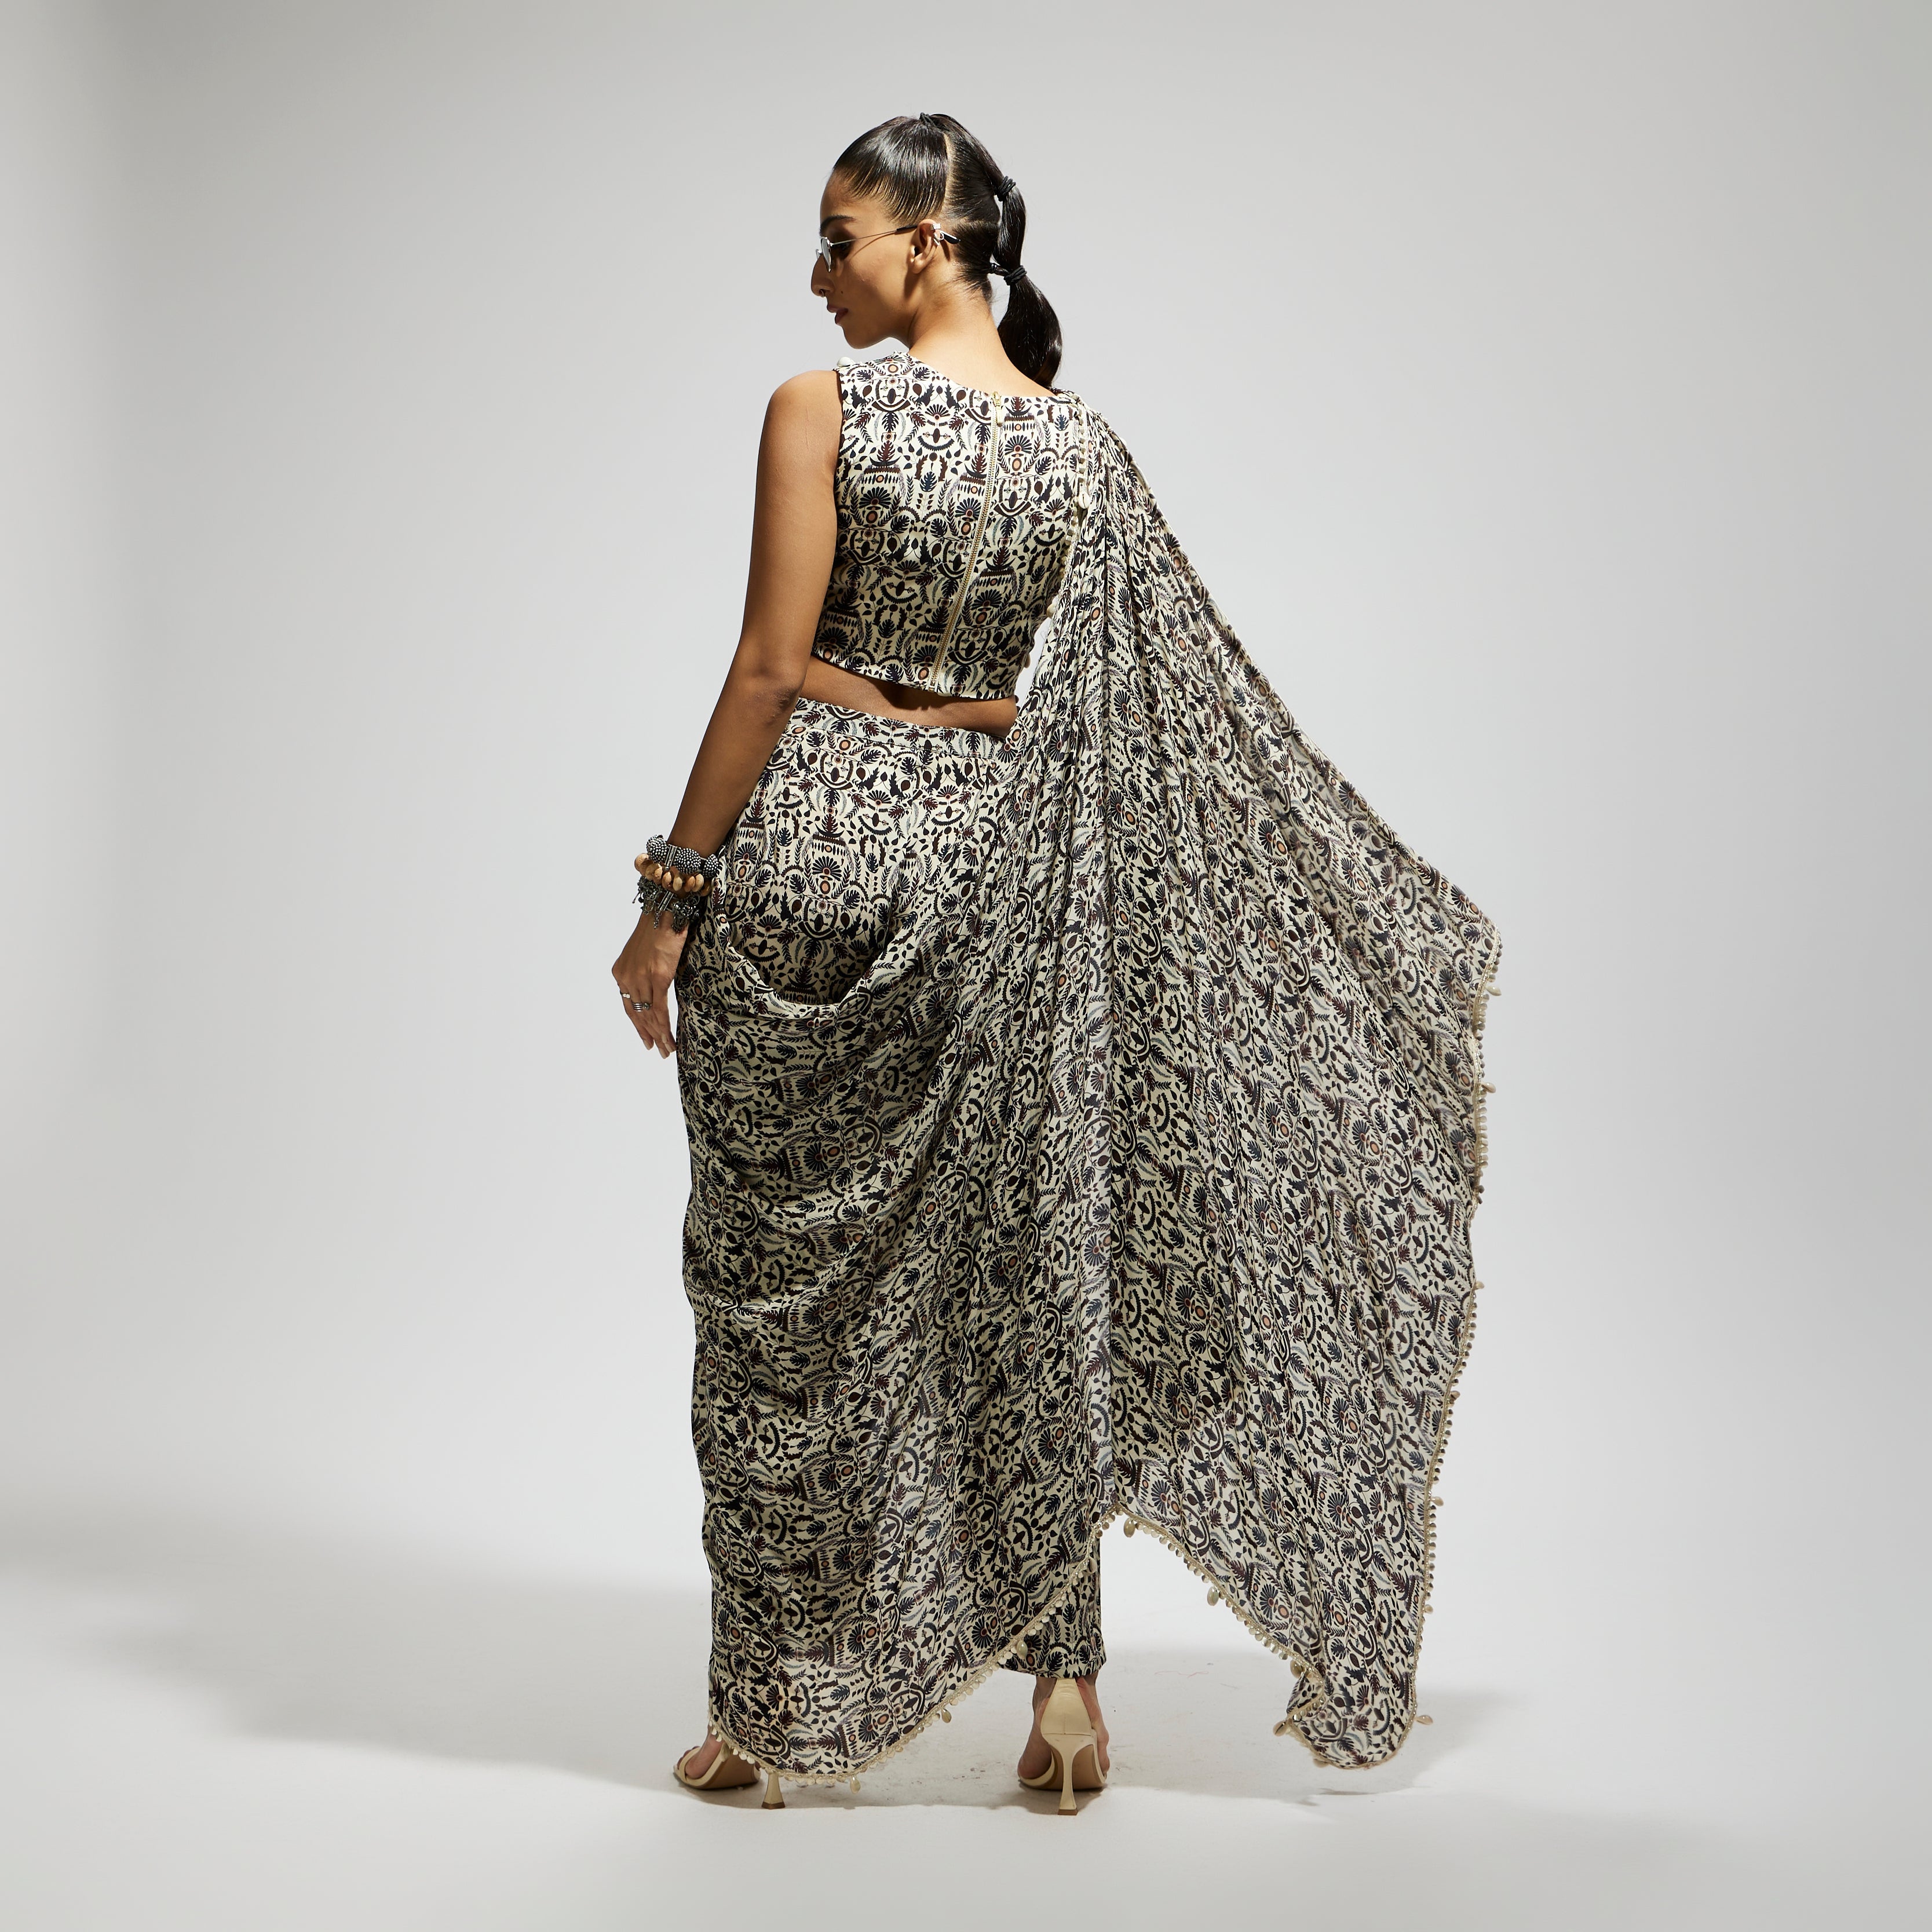 SAMSARA: WHITE JAAL PRINT CROP TOP WITH ATTACHED DRAPE WITH PANTS